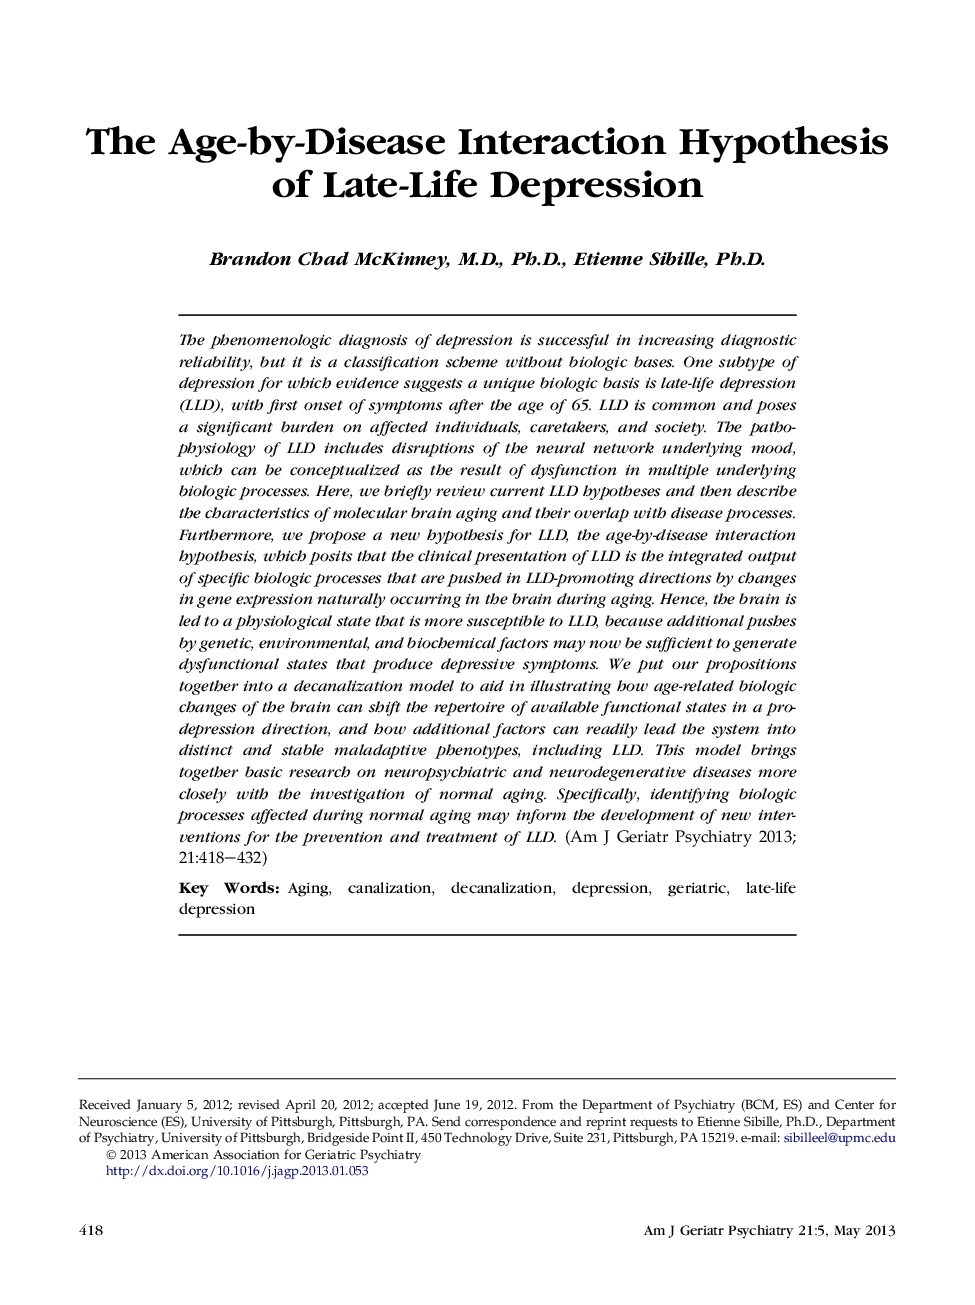 The Age-by-Disease Interaction Hypothesis of Late-Life Depression